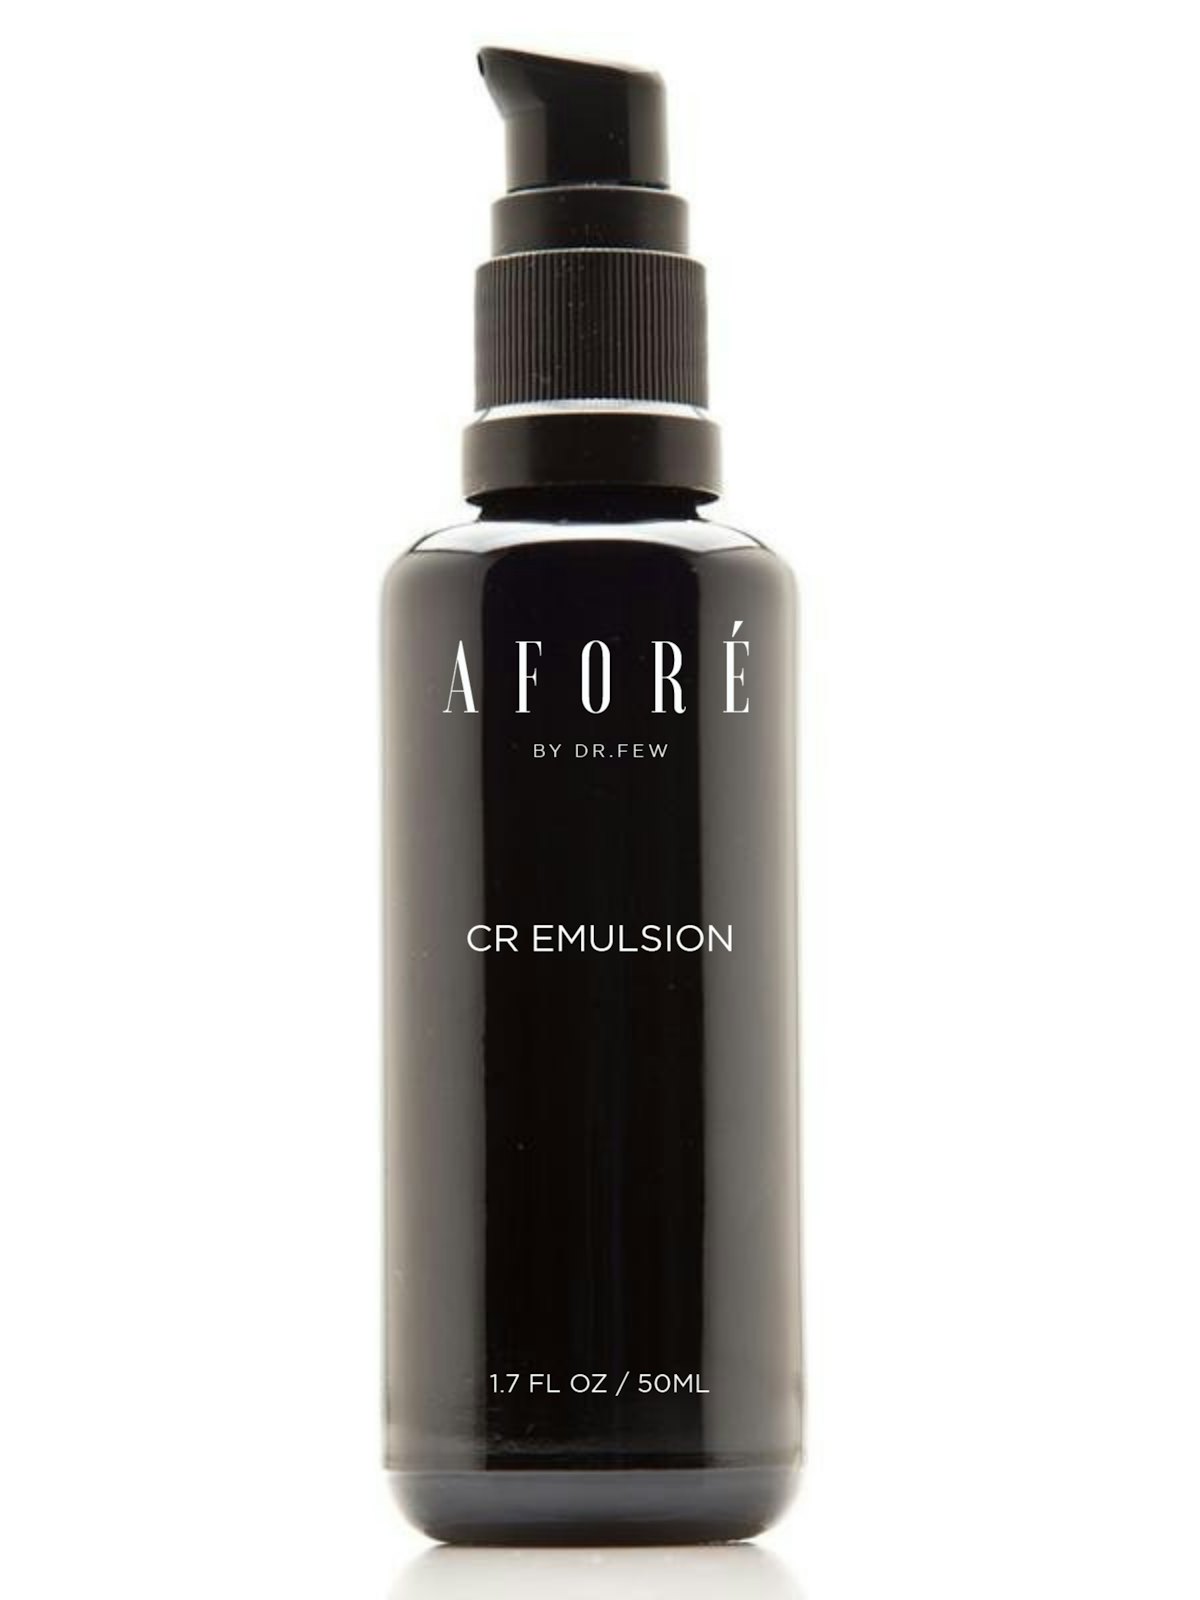 Afore by Dr. Few CR Emulsion From: Afore